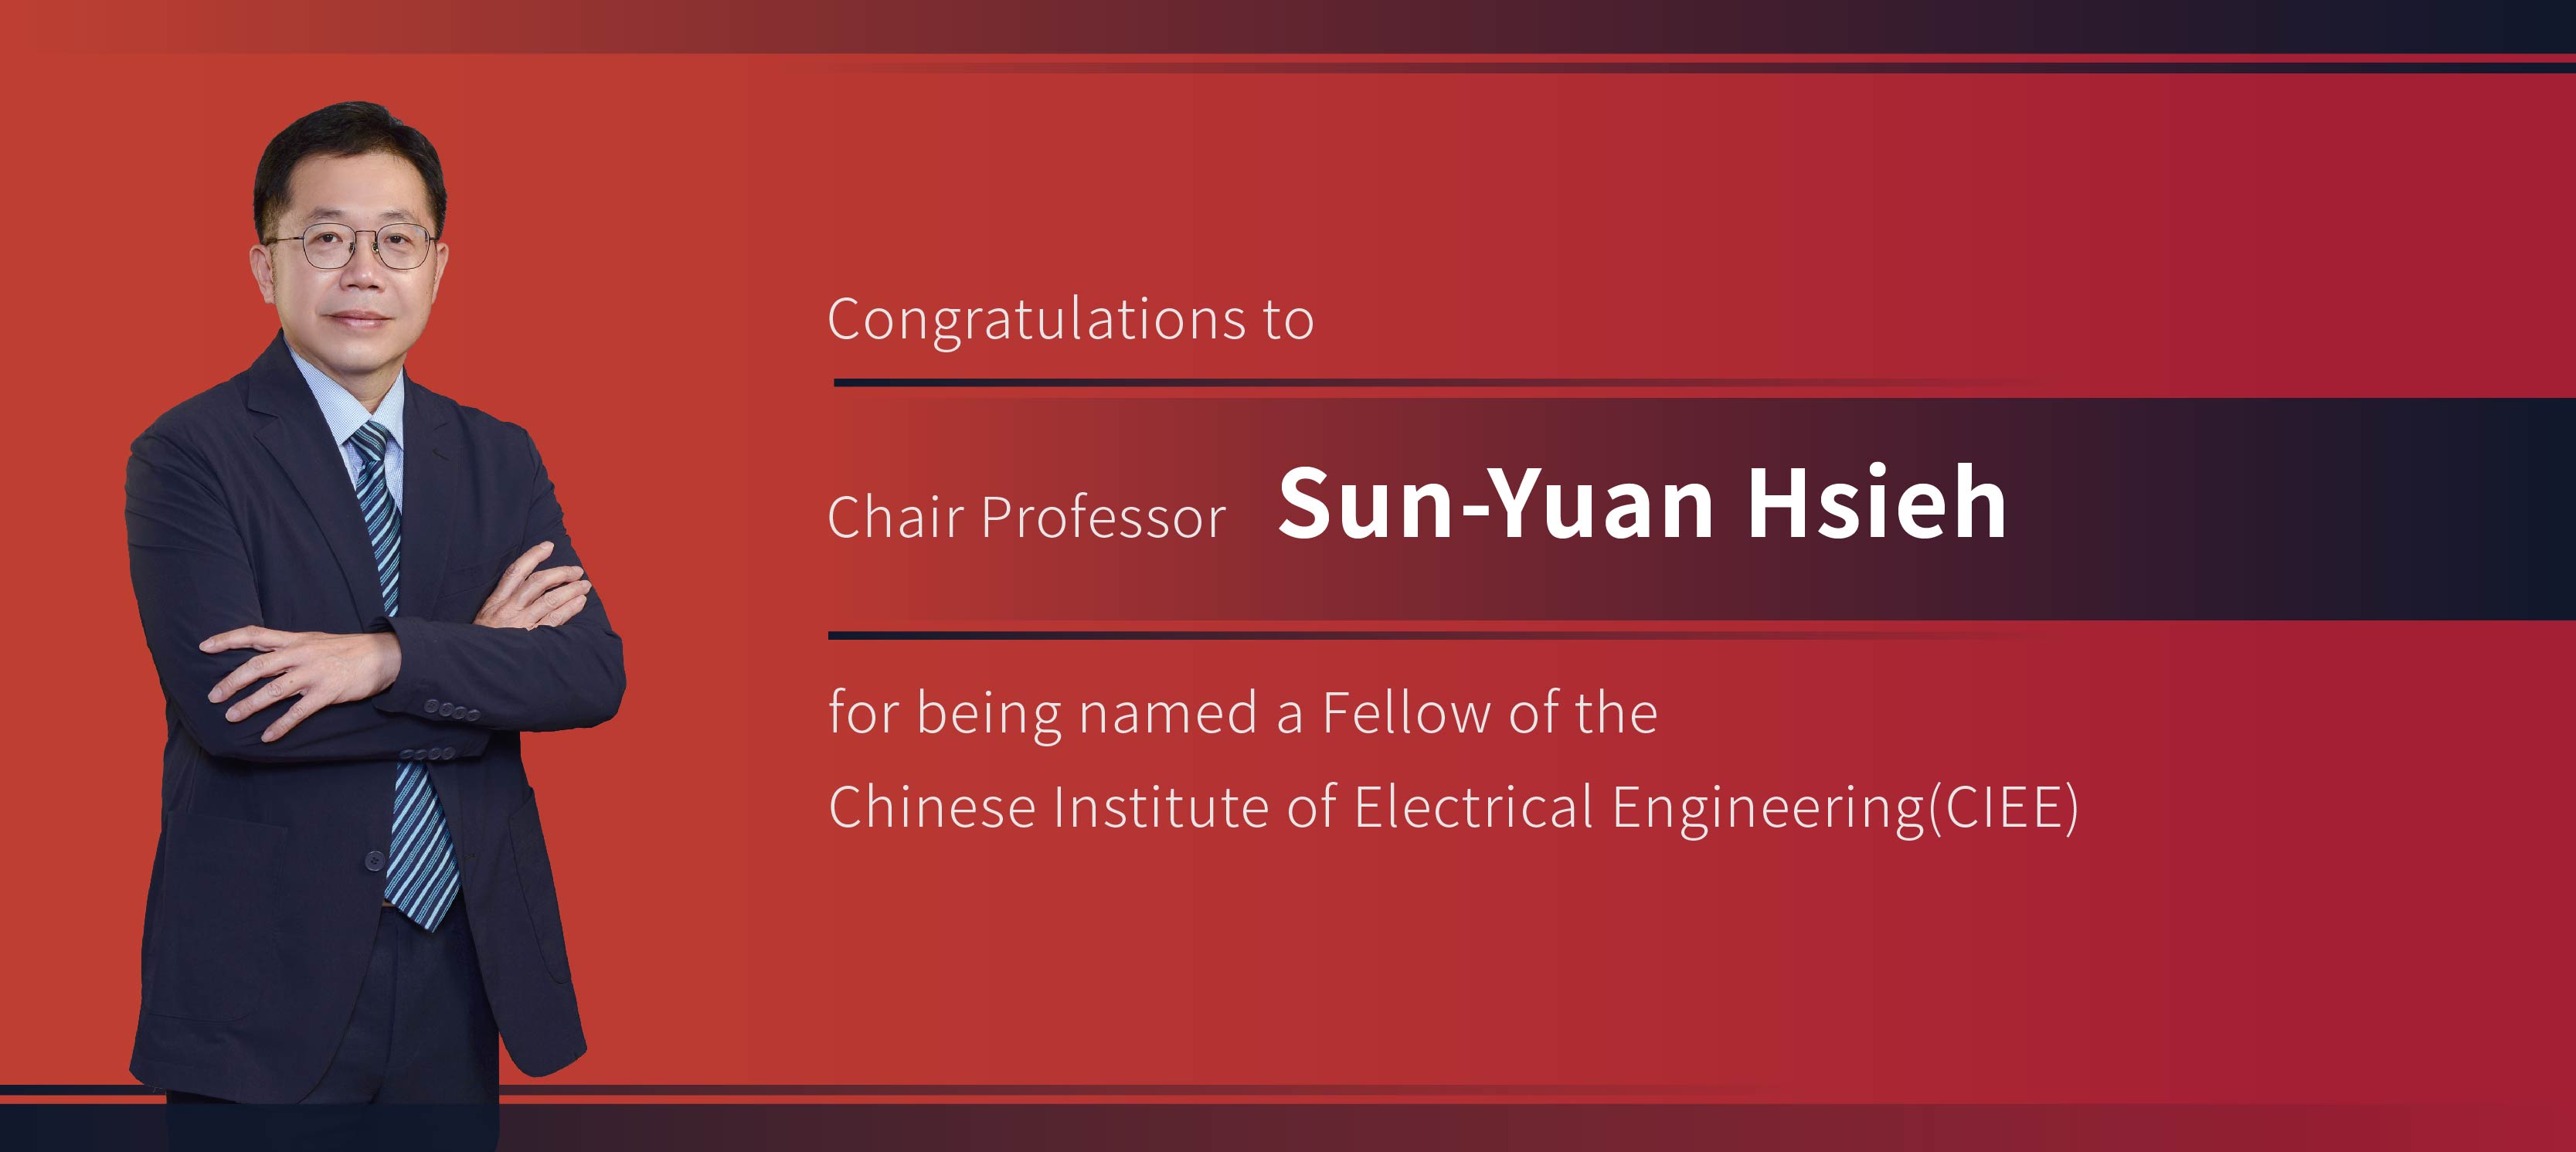 Congratulations to Chair Professor Sun-Yuan Hsieh for being named a Fellow of the Chinese Institute of Electrical Engineering(CIEE)!